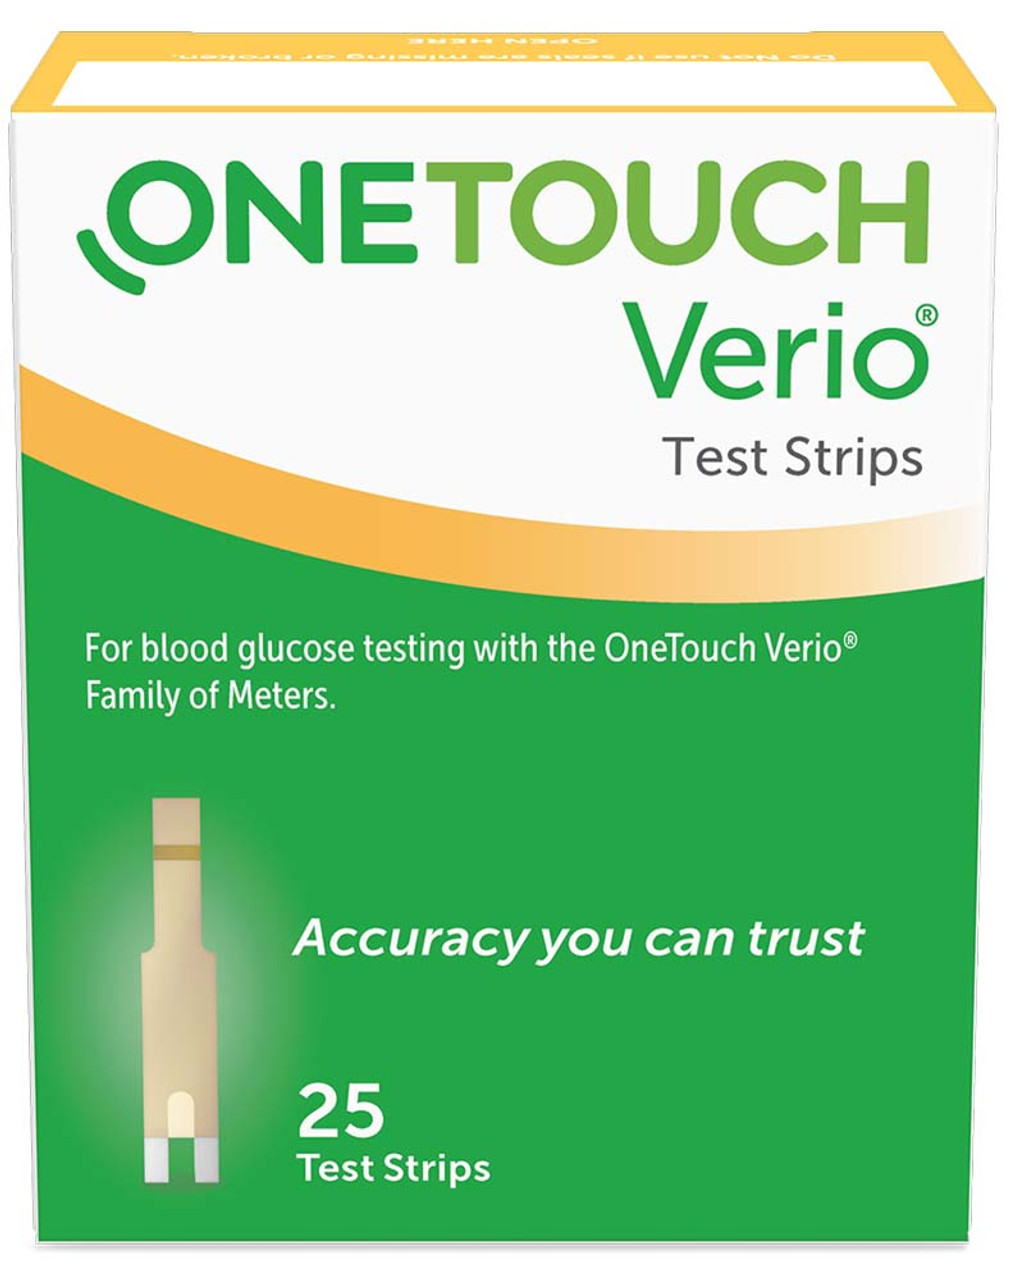 OneTouch Verio Diabetes Test Strips Value Pack - 30 ct